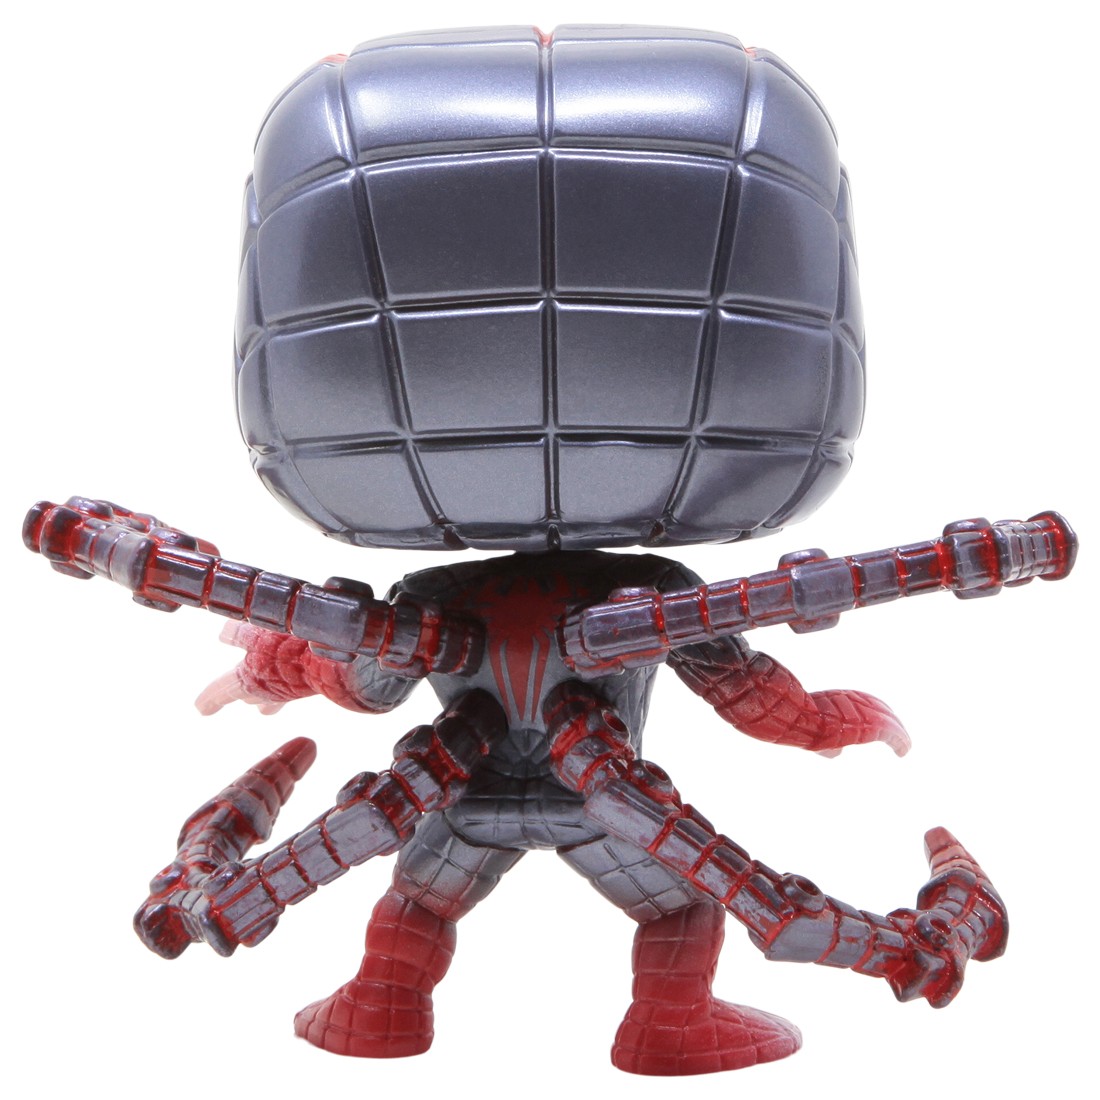 Spider-Man Miles Morales Programmable Suit Funko Pop! Collectible